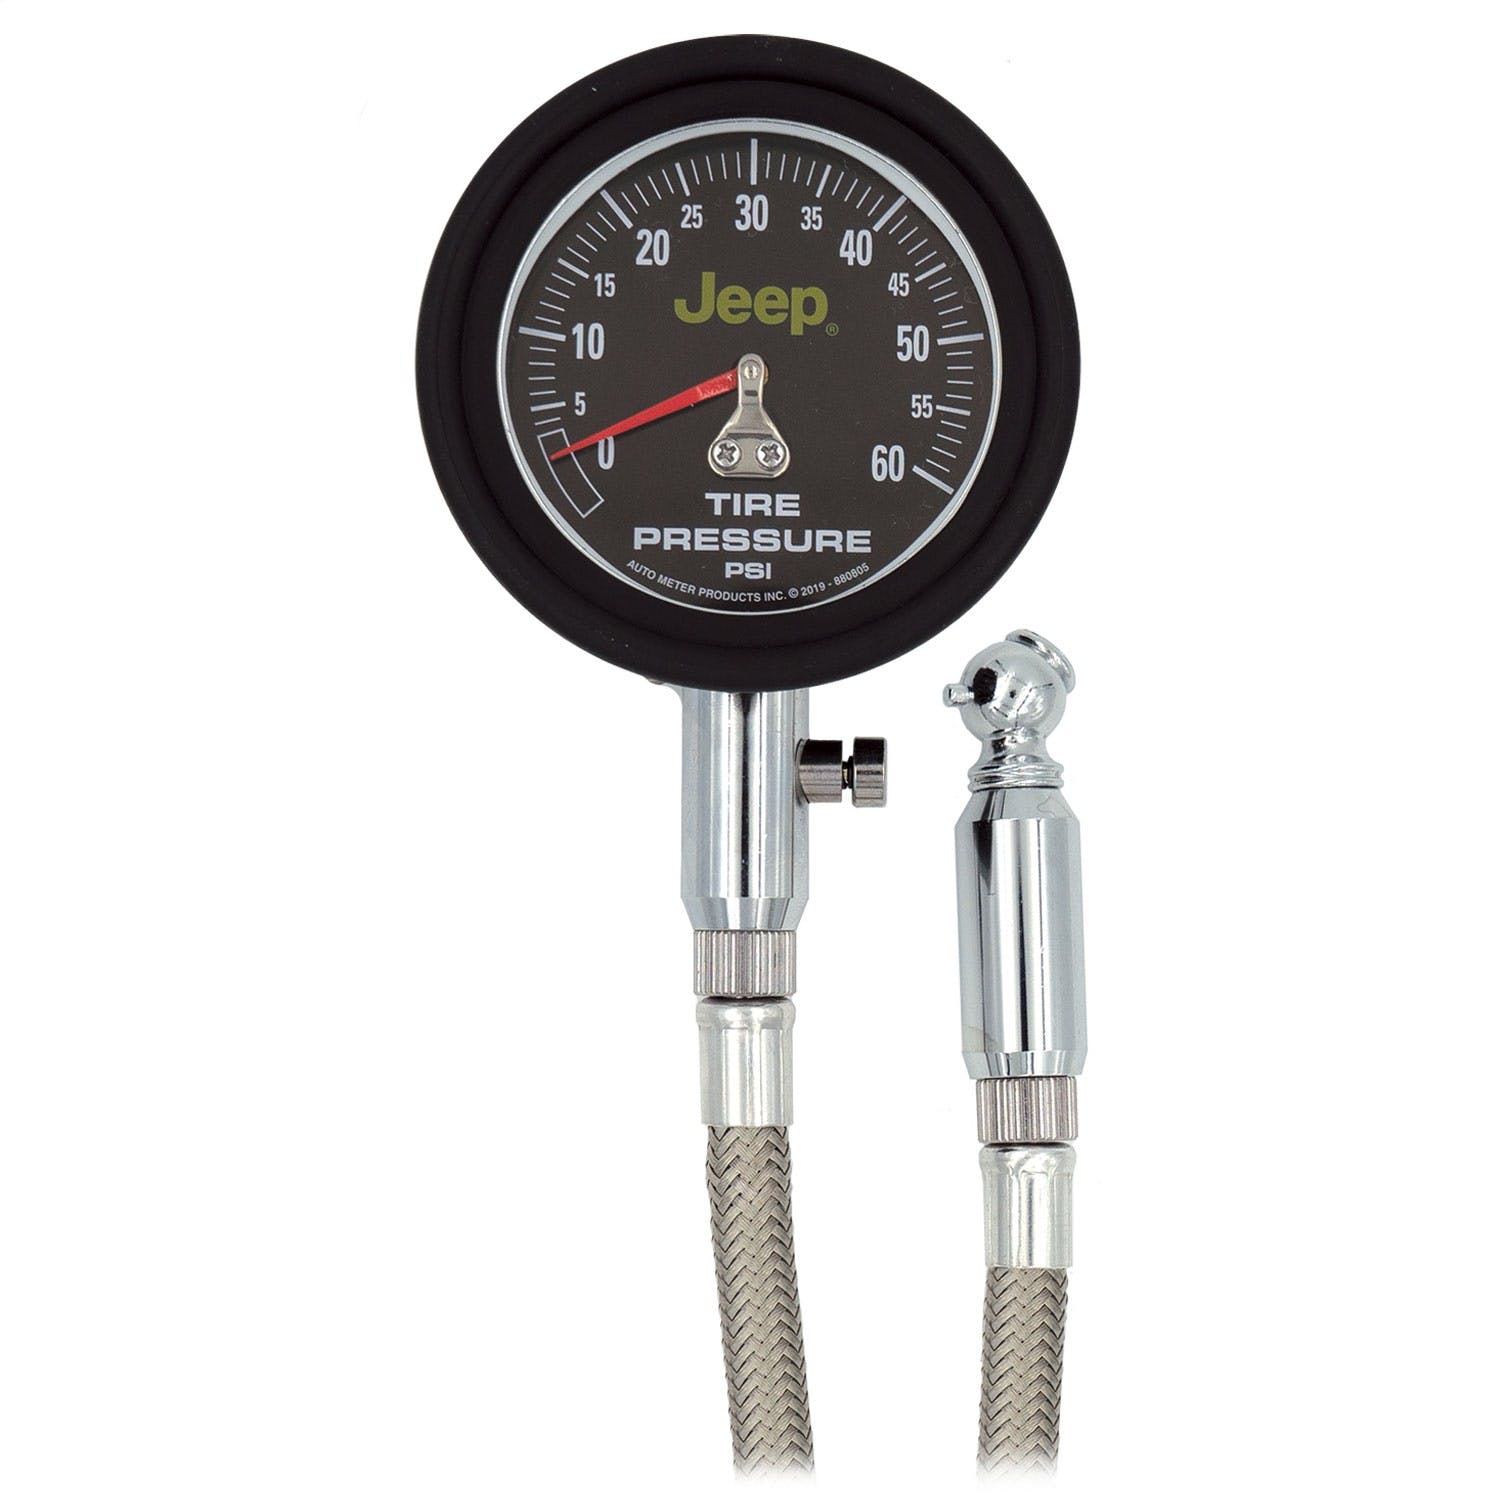 AutoMeter Products 880805 Tire Pressure Gauge, 0-60PSI, Jeep, Analog